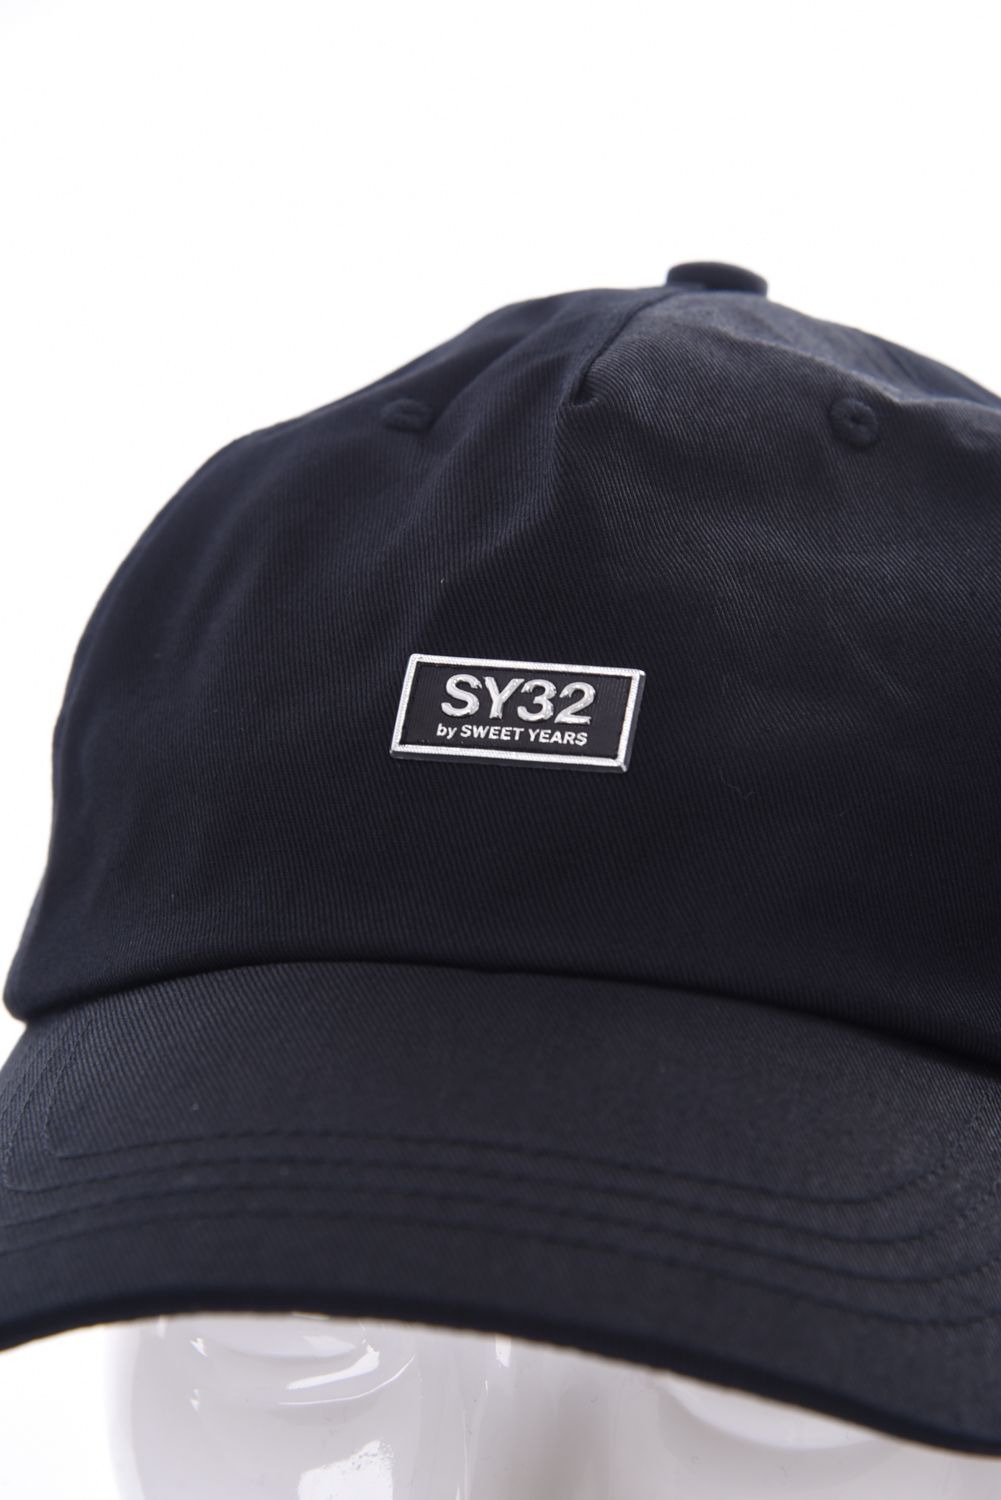 SY32 by SWEET YEARS GOLF - MINI METALLIC TAG CAP / メタリックロゴ